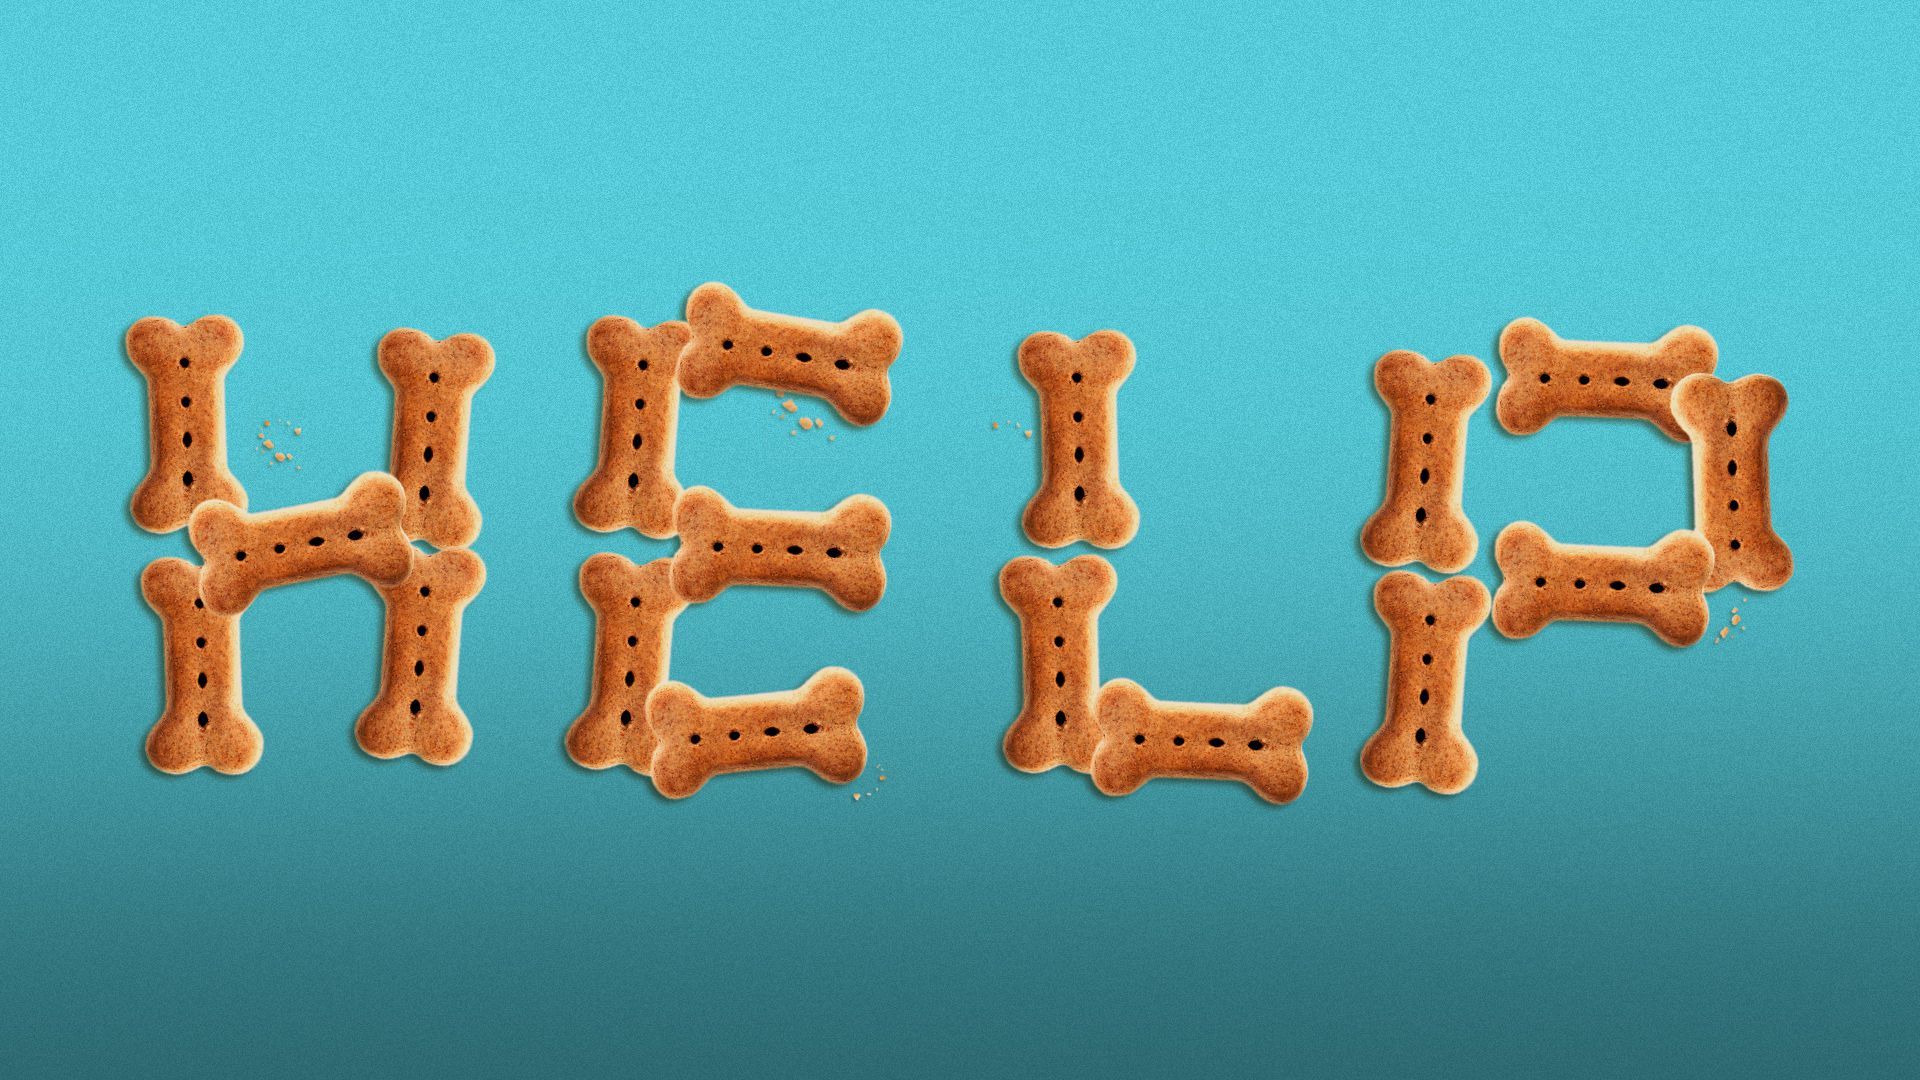 Illustration of dog treats spelling out “HELP”. 